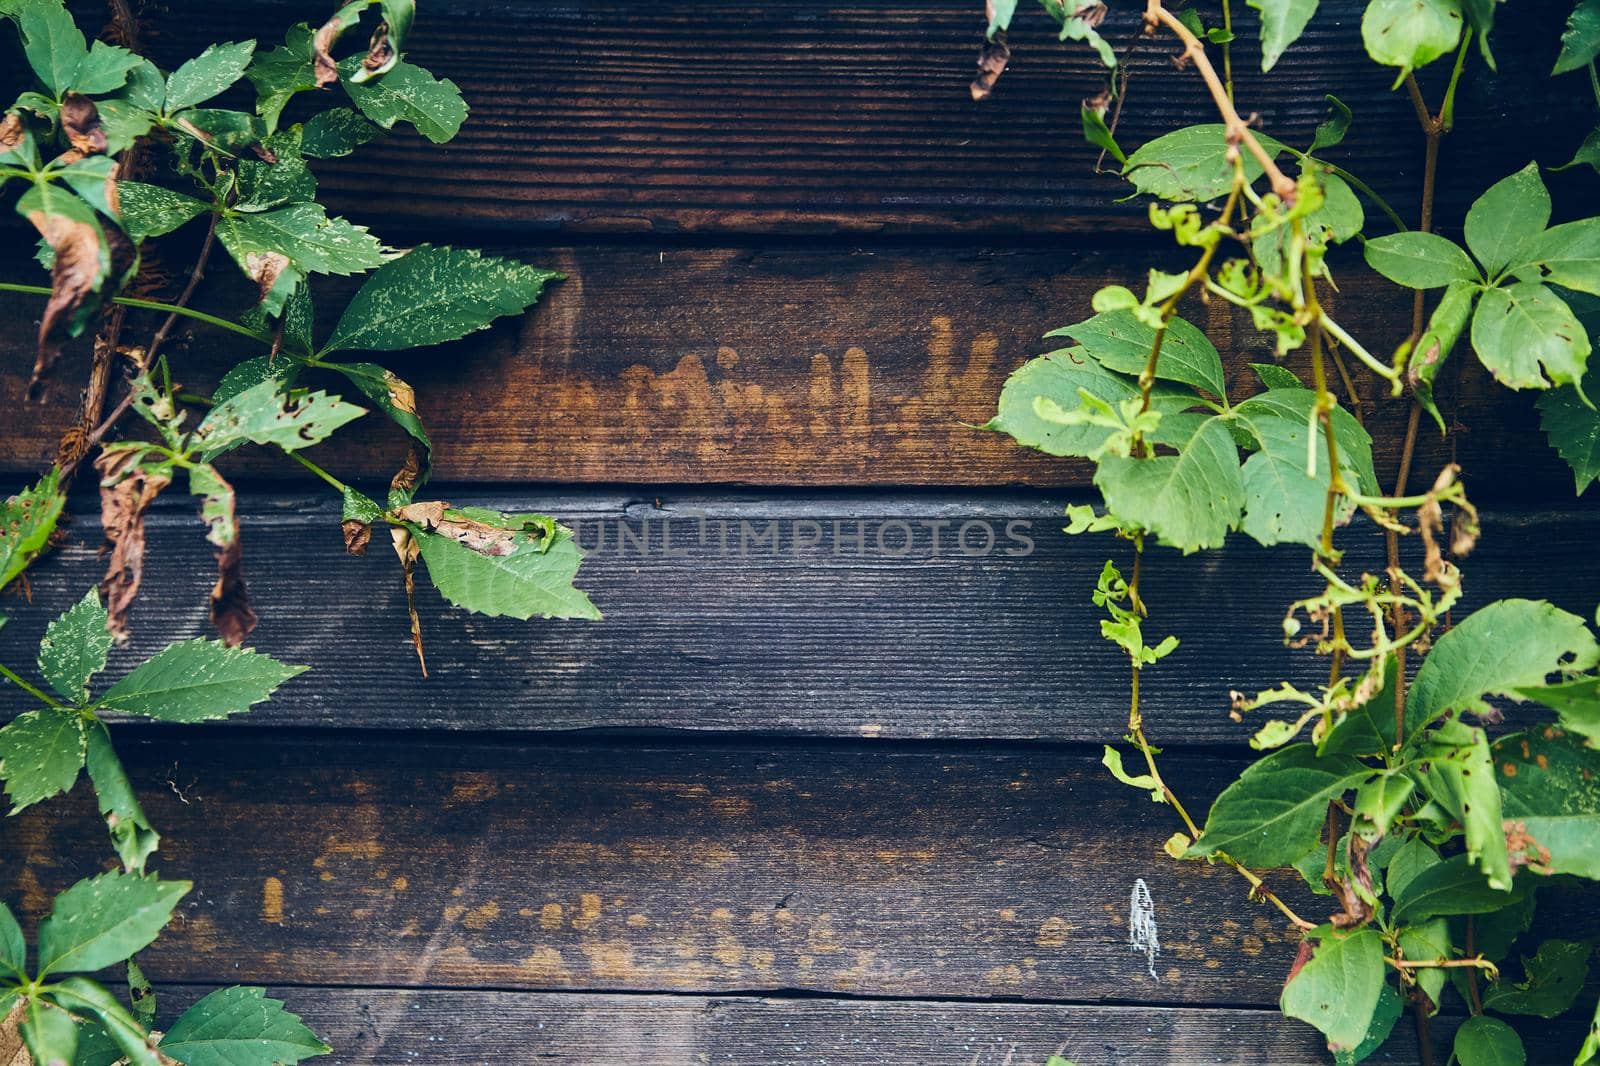 Close up of old dark wood panels with green vines by njproductions